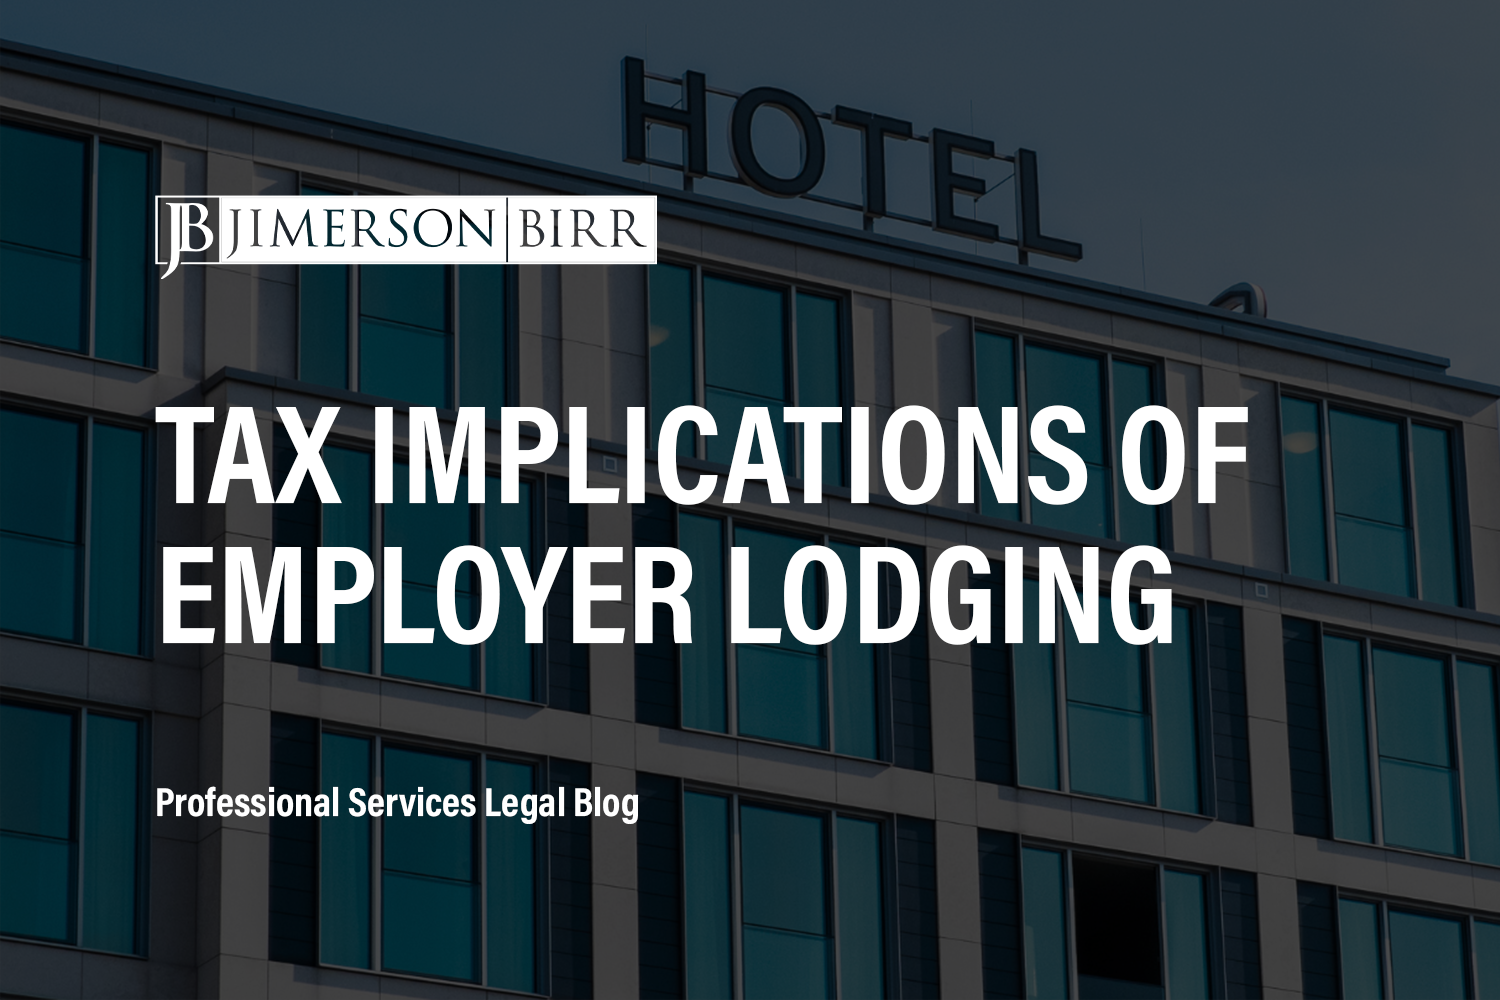 Tax Implications of Employer Lodging